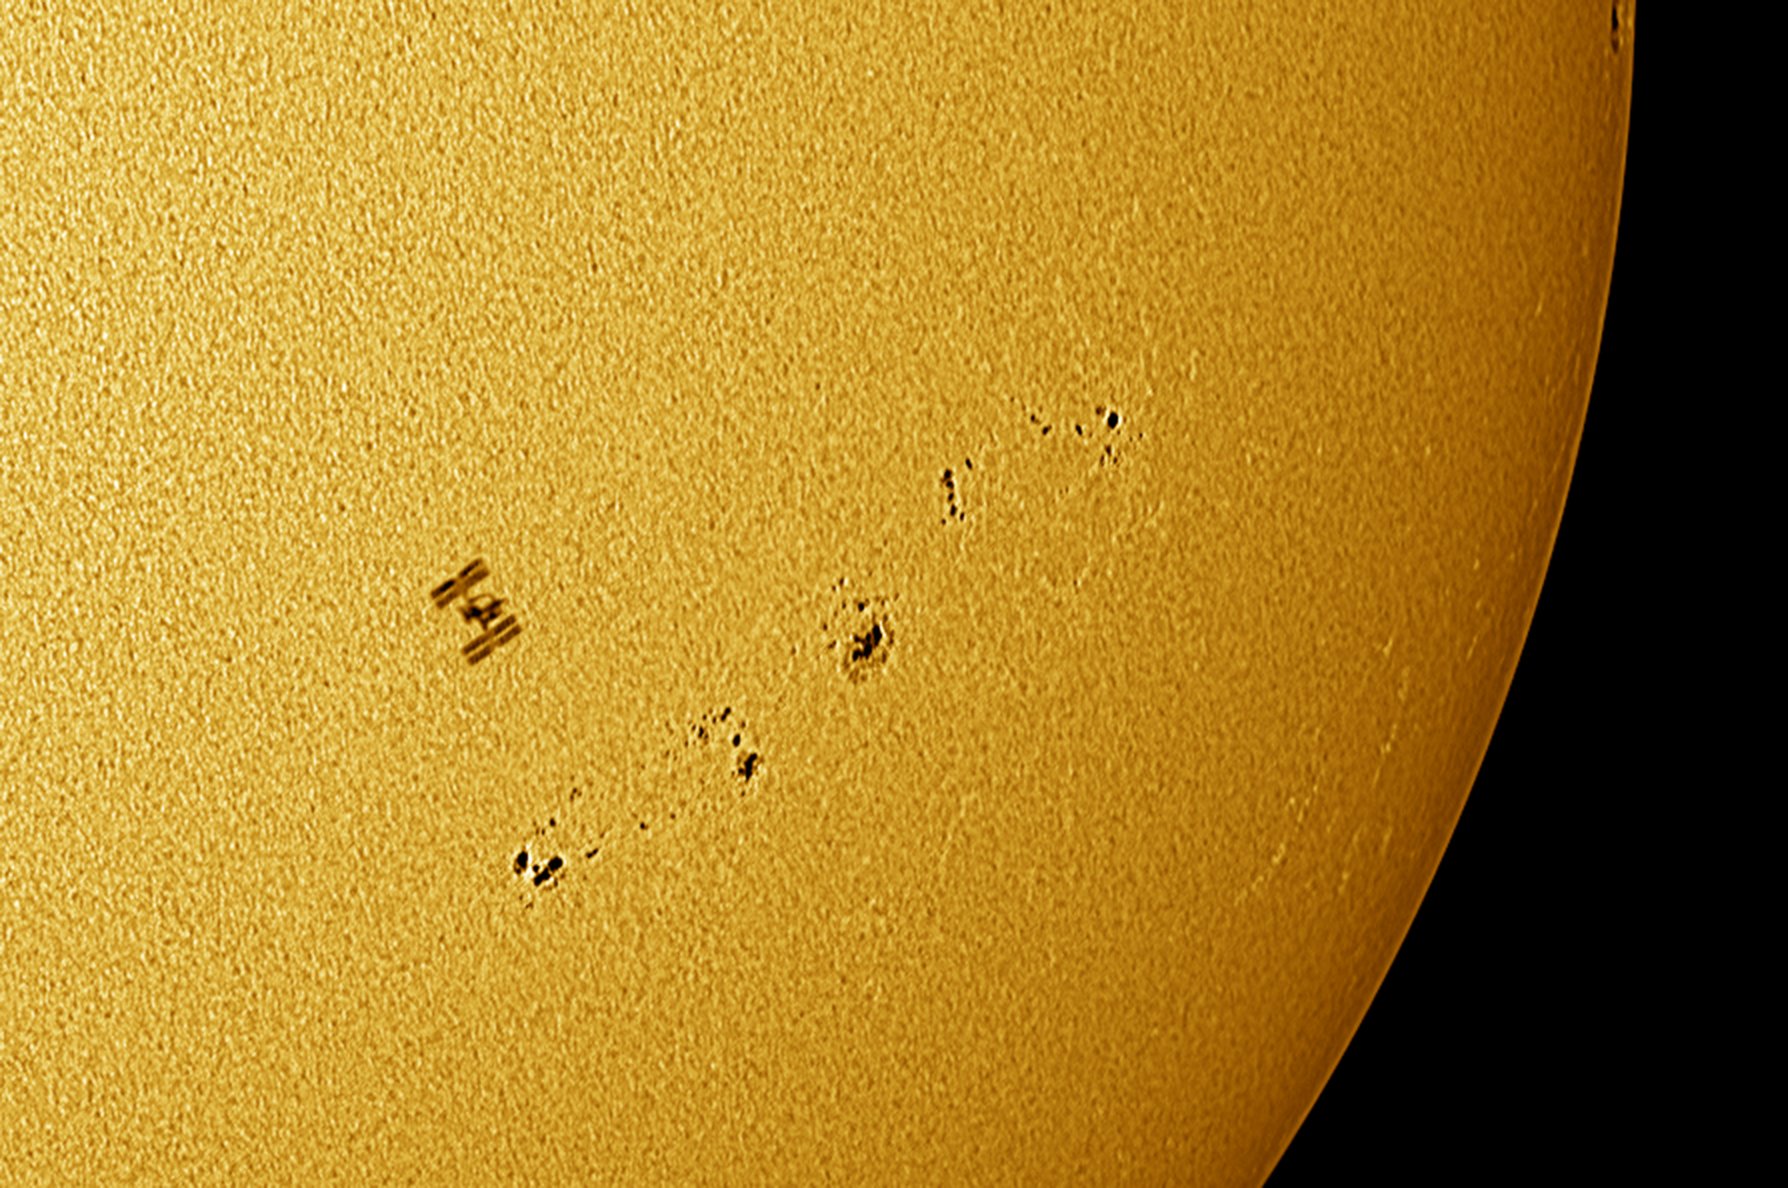 ISS passes in front of the sun